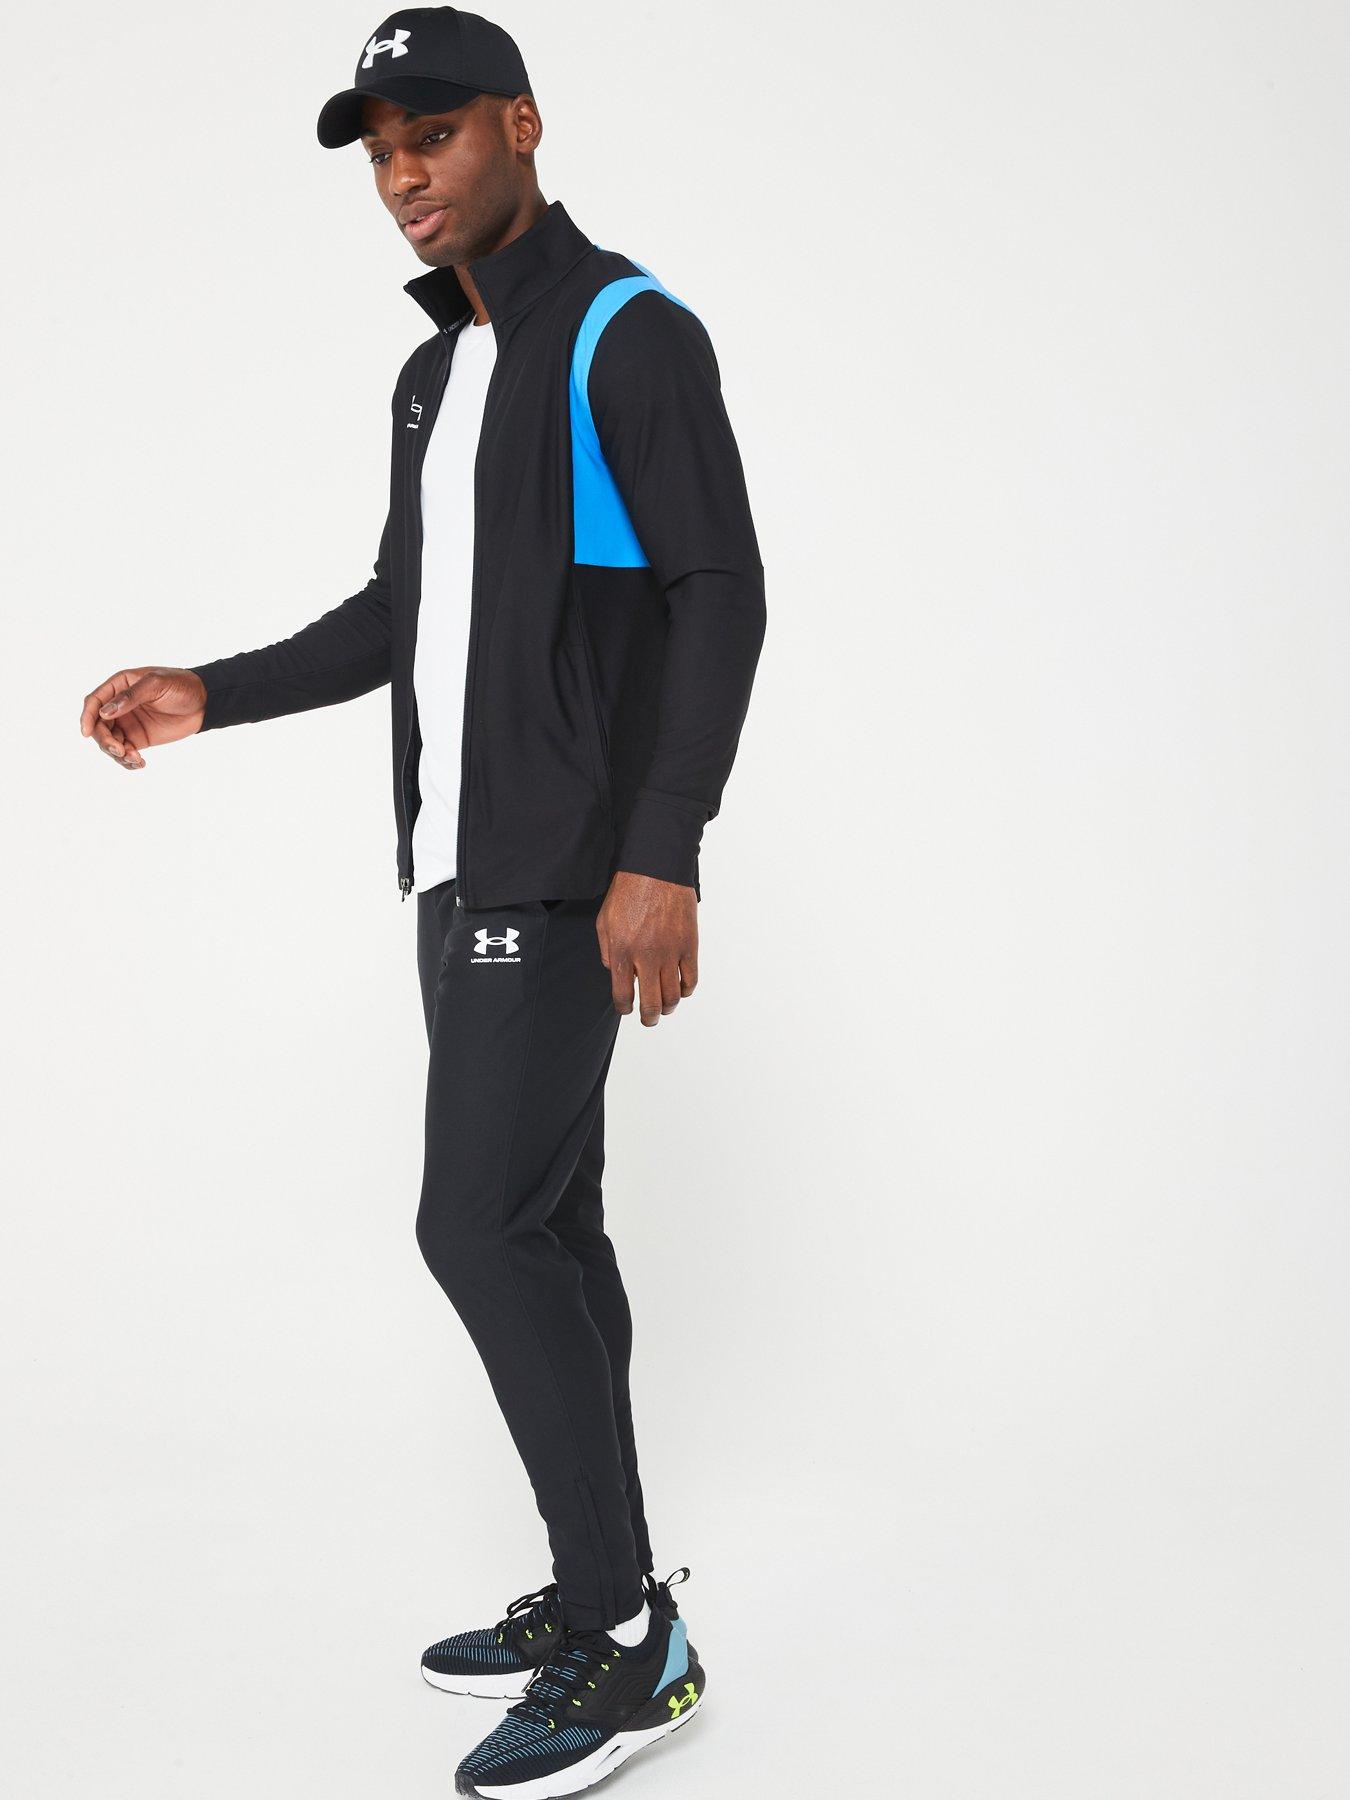 UNDER ARMOUR Mens Challenger Tracksuit - Navy